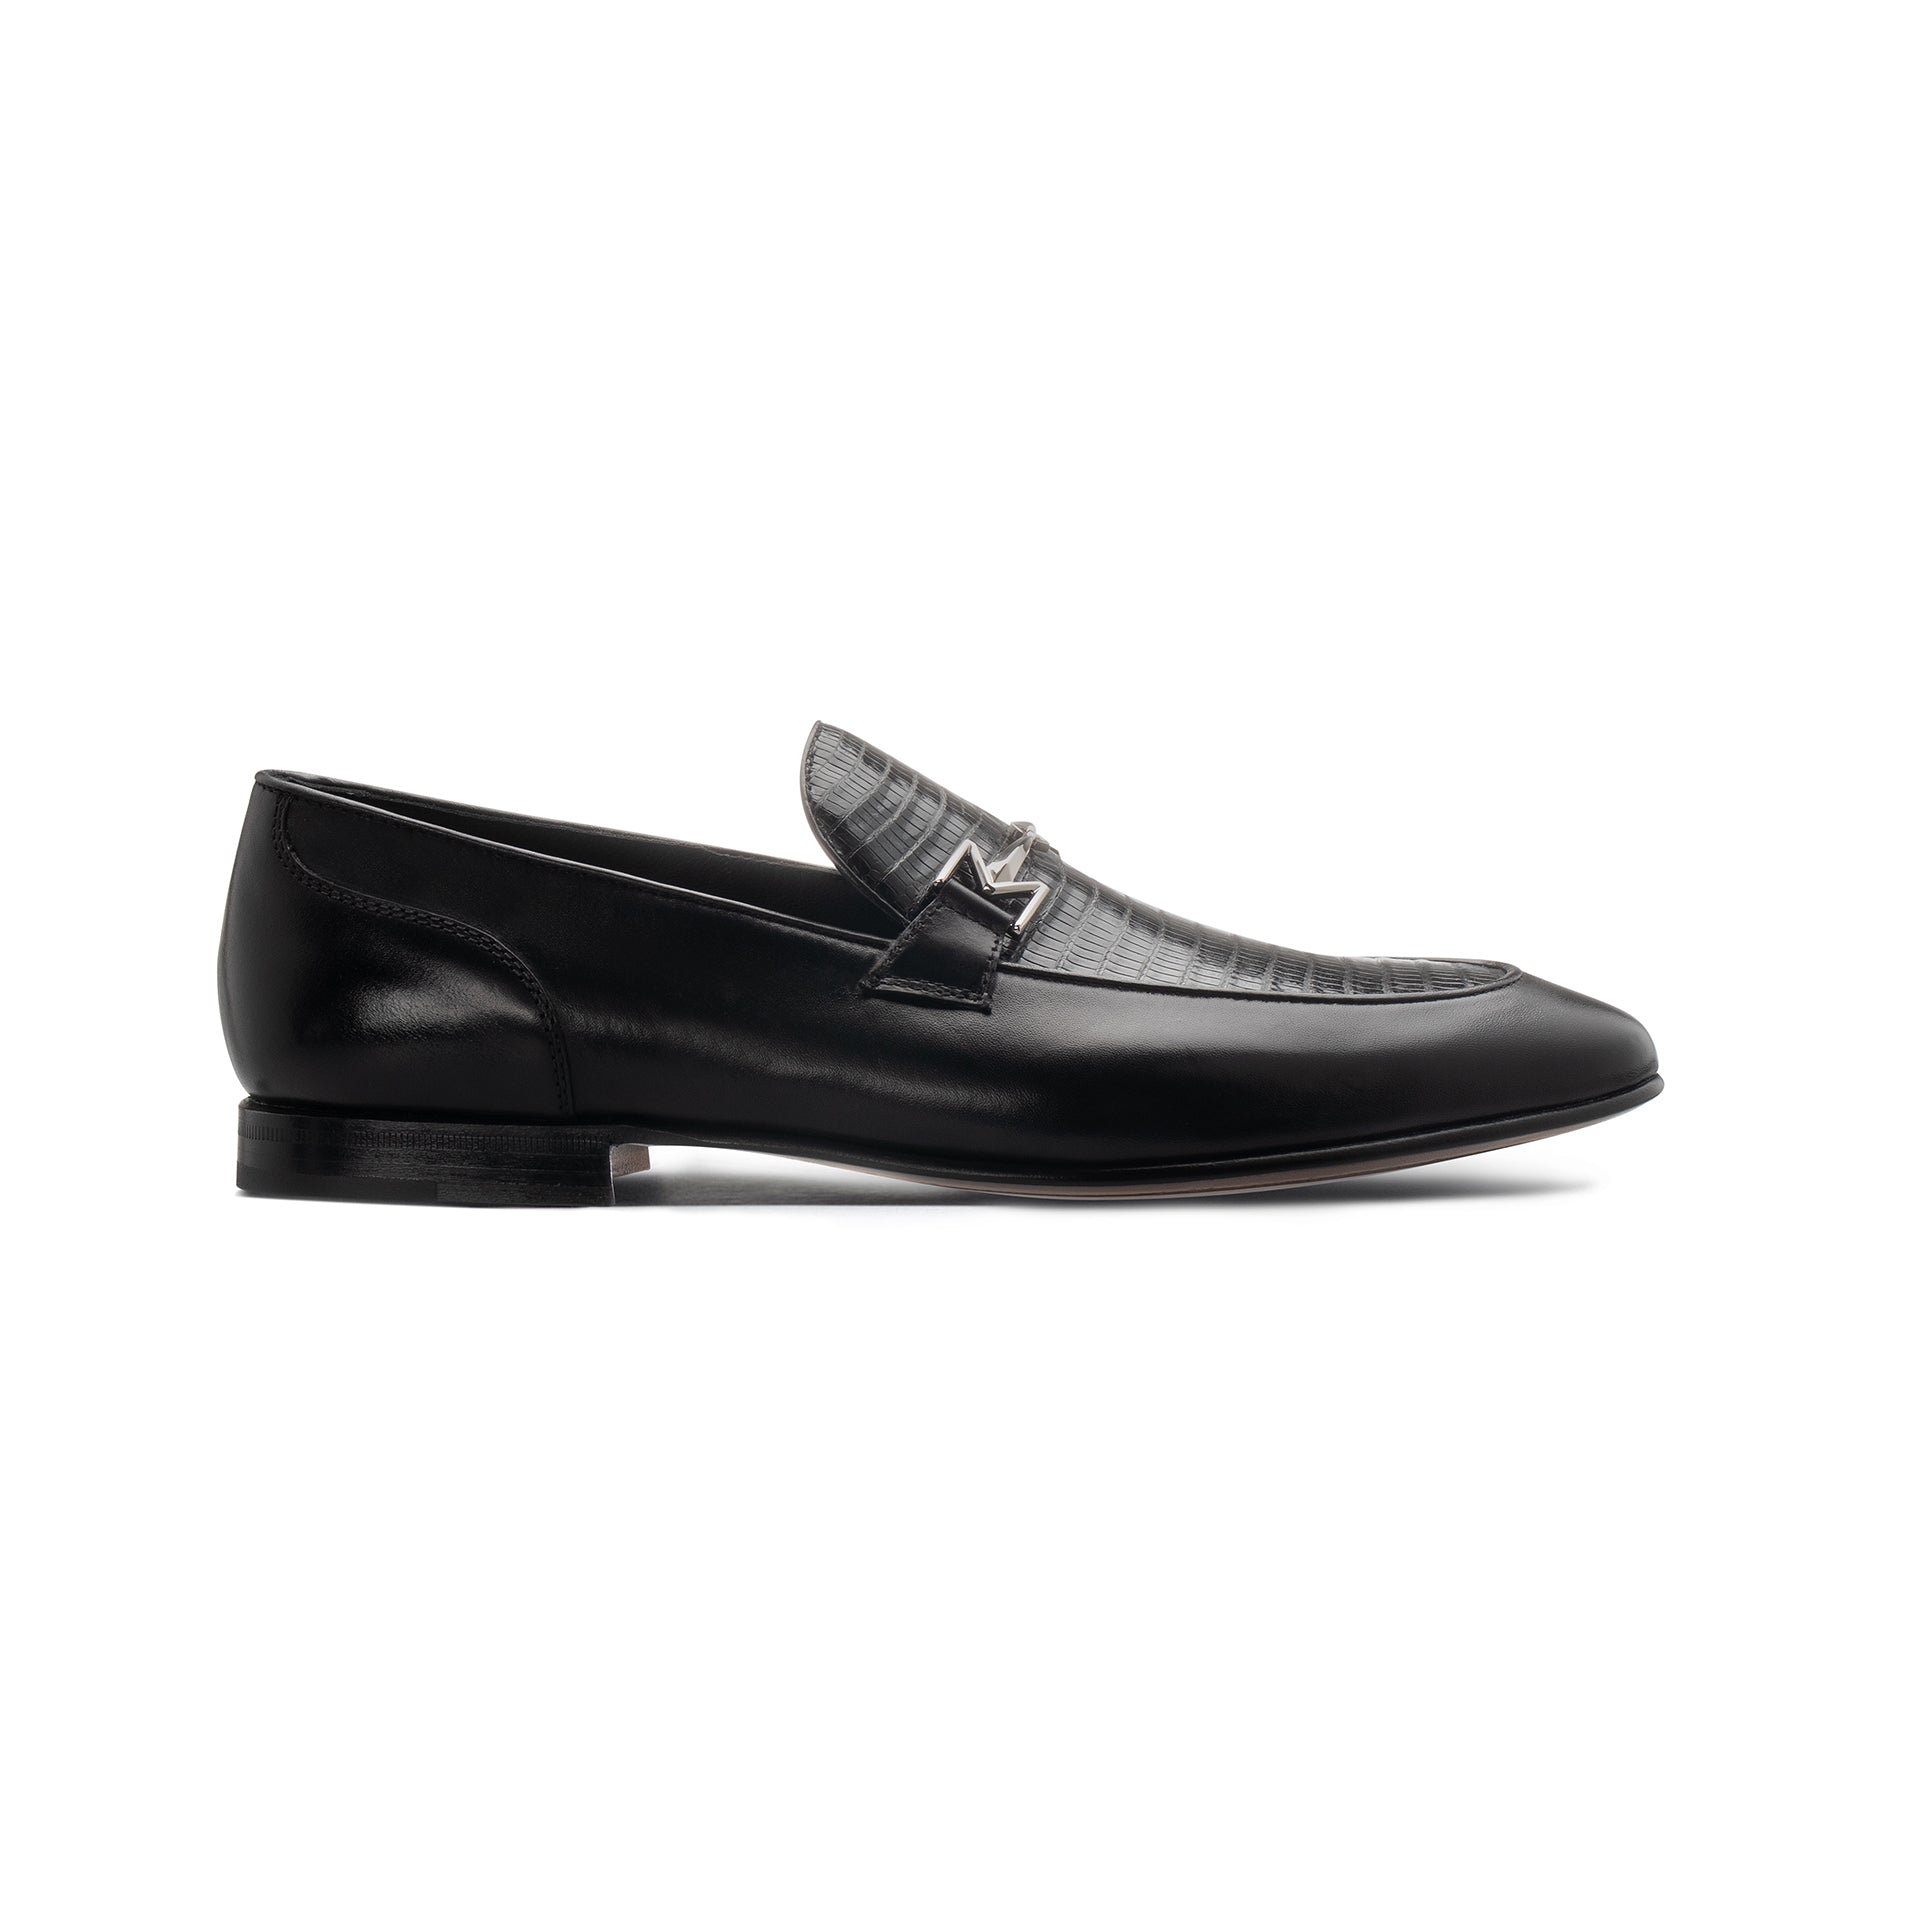 Black leather Loafer Moreschi Italian Shoes - Main Image